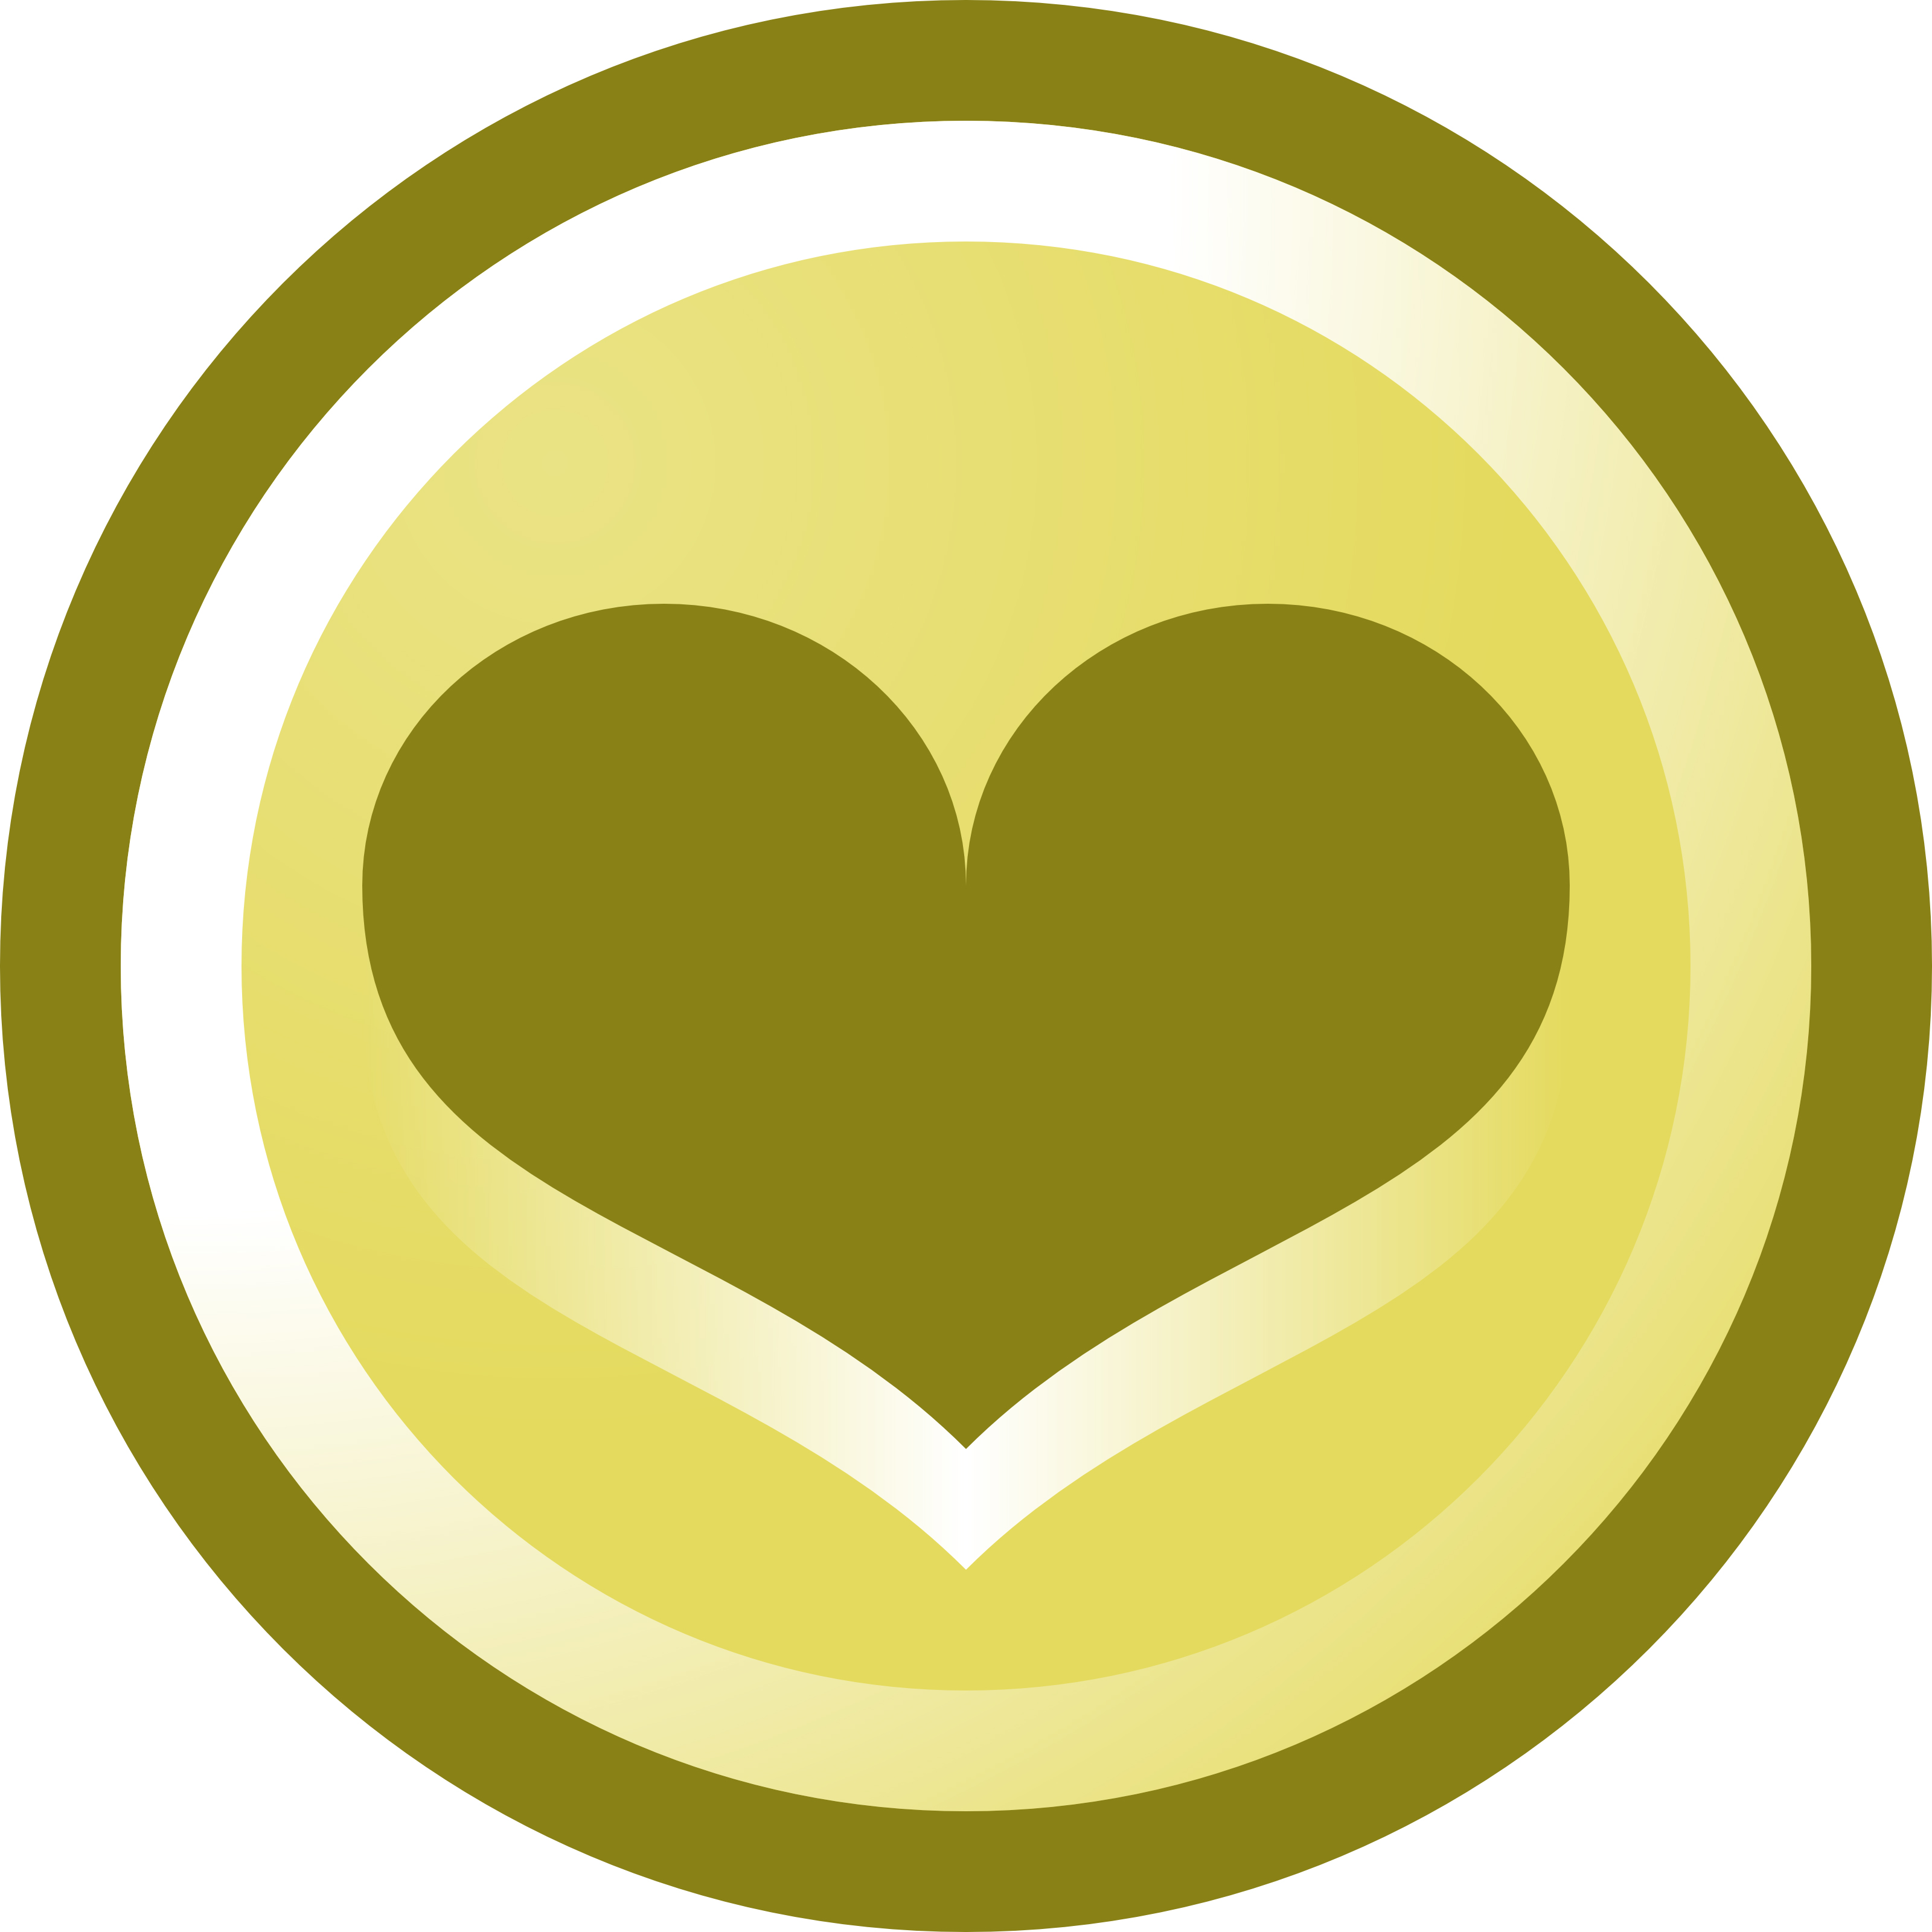 Free Vector Illustration Of A Heart Icon